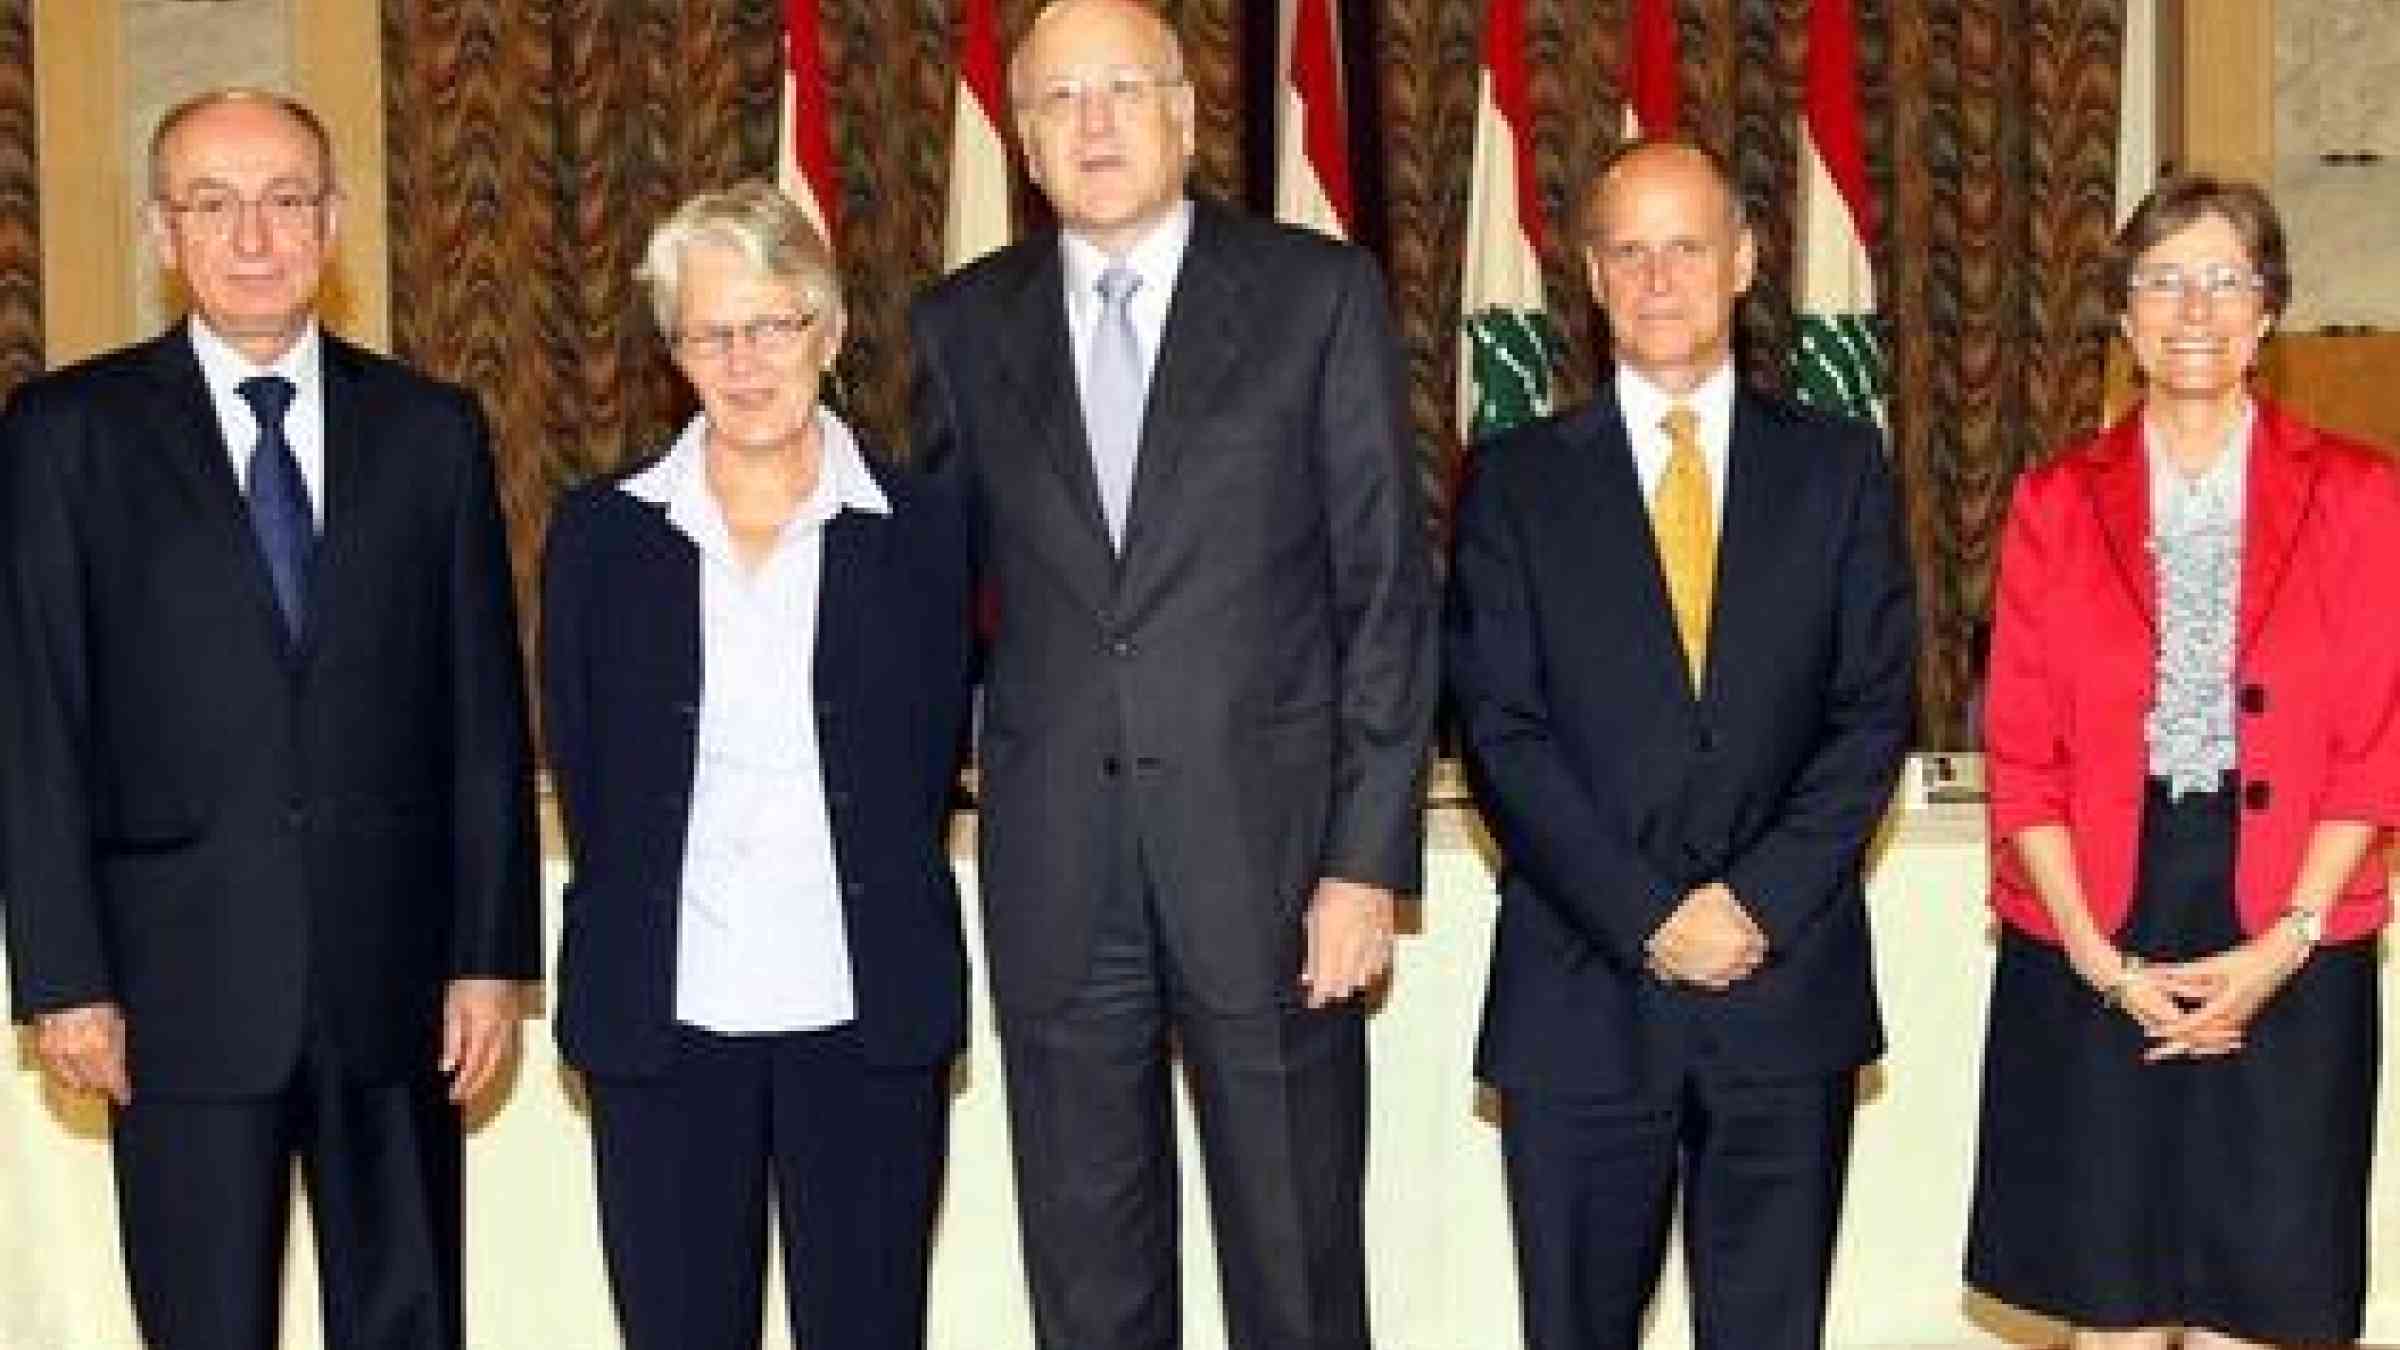 From left: Moeen Hamzeh - Secretary-General of the National Council for Scientific Research, Margareta Wahlström, Najib Mikati - Prime Minister of Lebanon, Robert Watkins - United Nations Special Coordinator for Lebanon, and Ruth Flint - Ambassador of Switzerland.